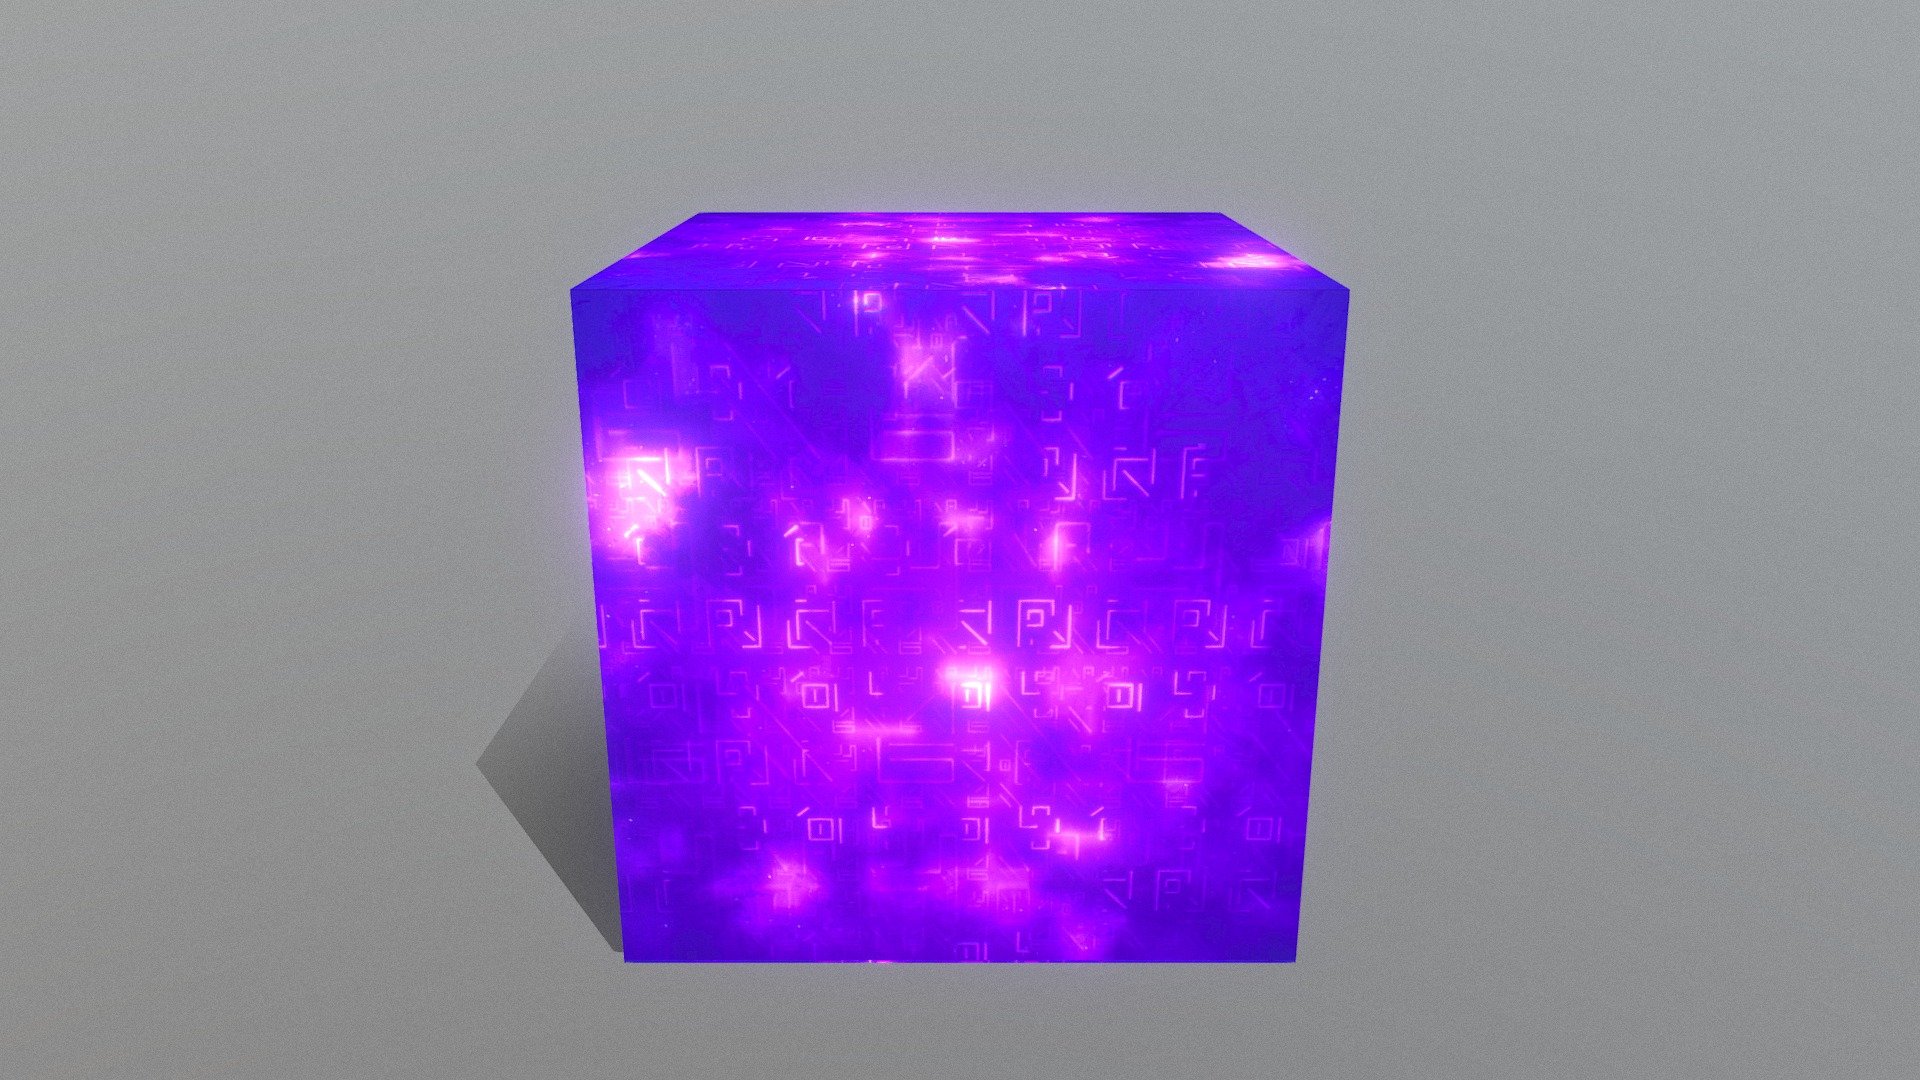 This Is Kevin The Cube From Fortnite Chapter 1 Season 5 I found the texture online and put the texture on a cube and there i will make one looks more relistic in a couple months and problems or Questions Email me at: drewmiguellagos@gmail.com - Kevin The Cube - Download Free 3D model by lildrstrange11 3d model